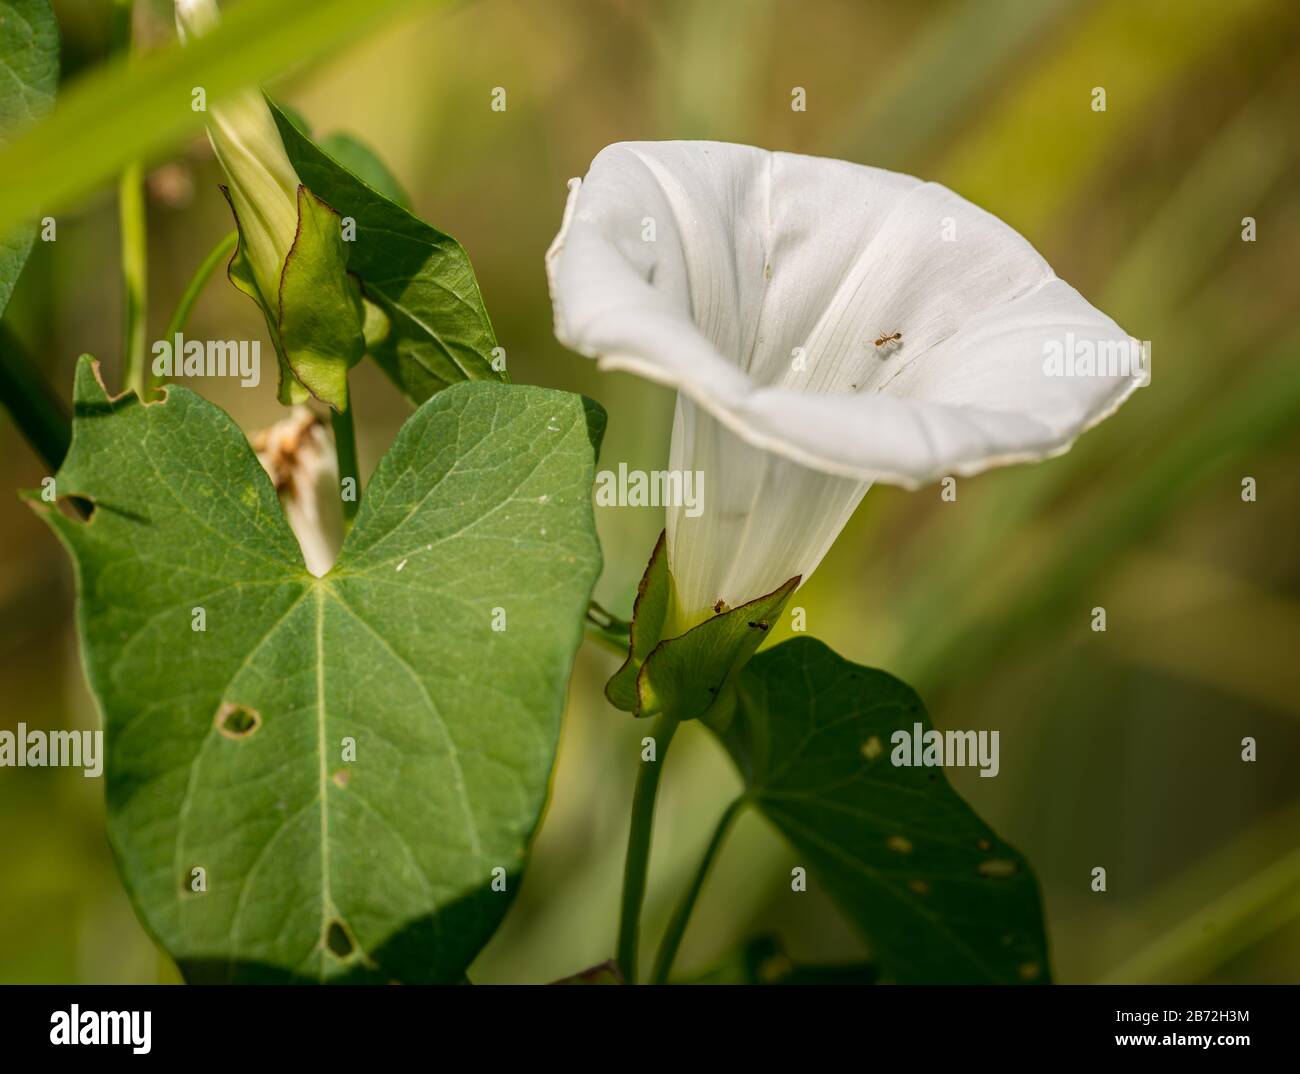 white morning glory flower with ant inside Stock Photo